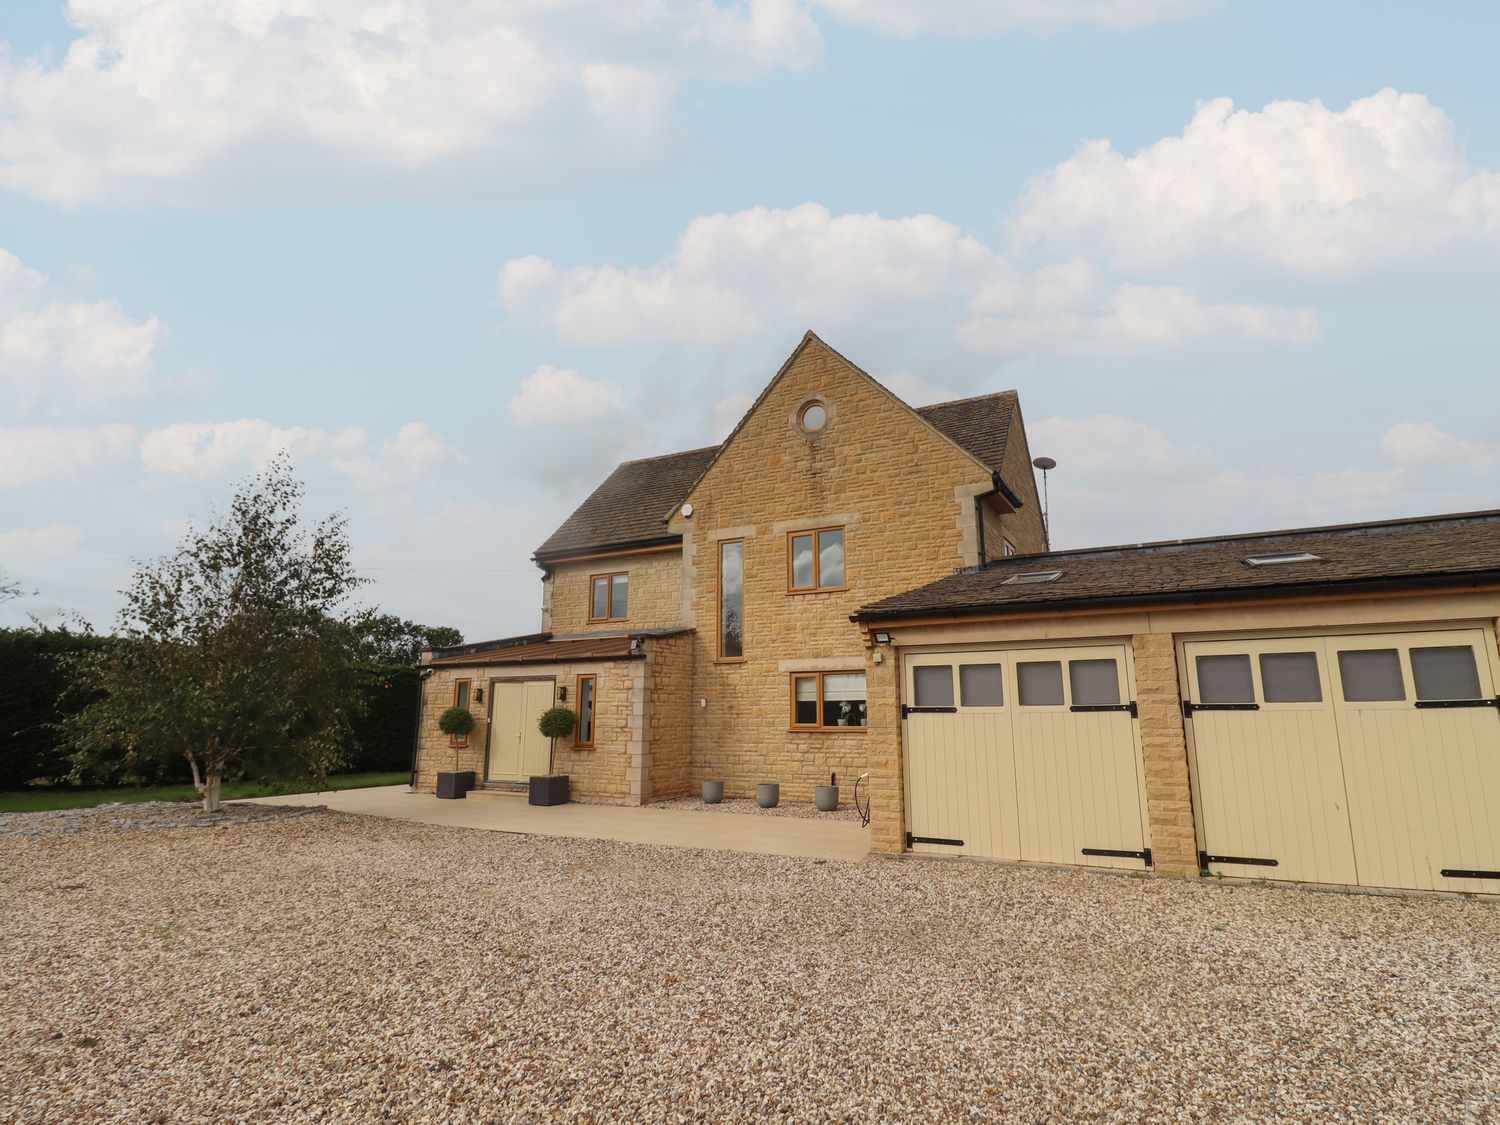 The Firs Retreat - Cotswolds - 1143990 - photo 1